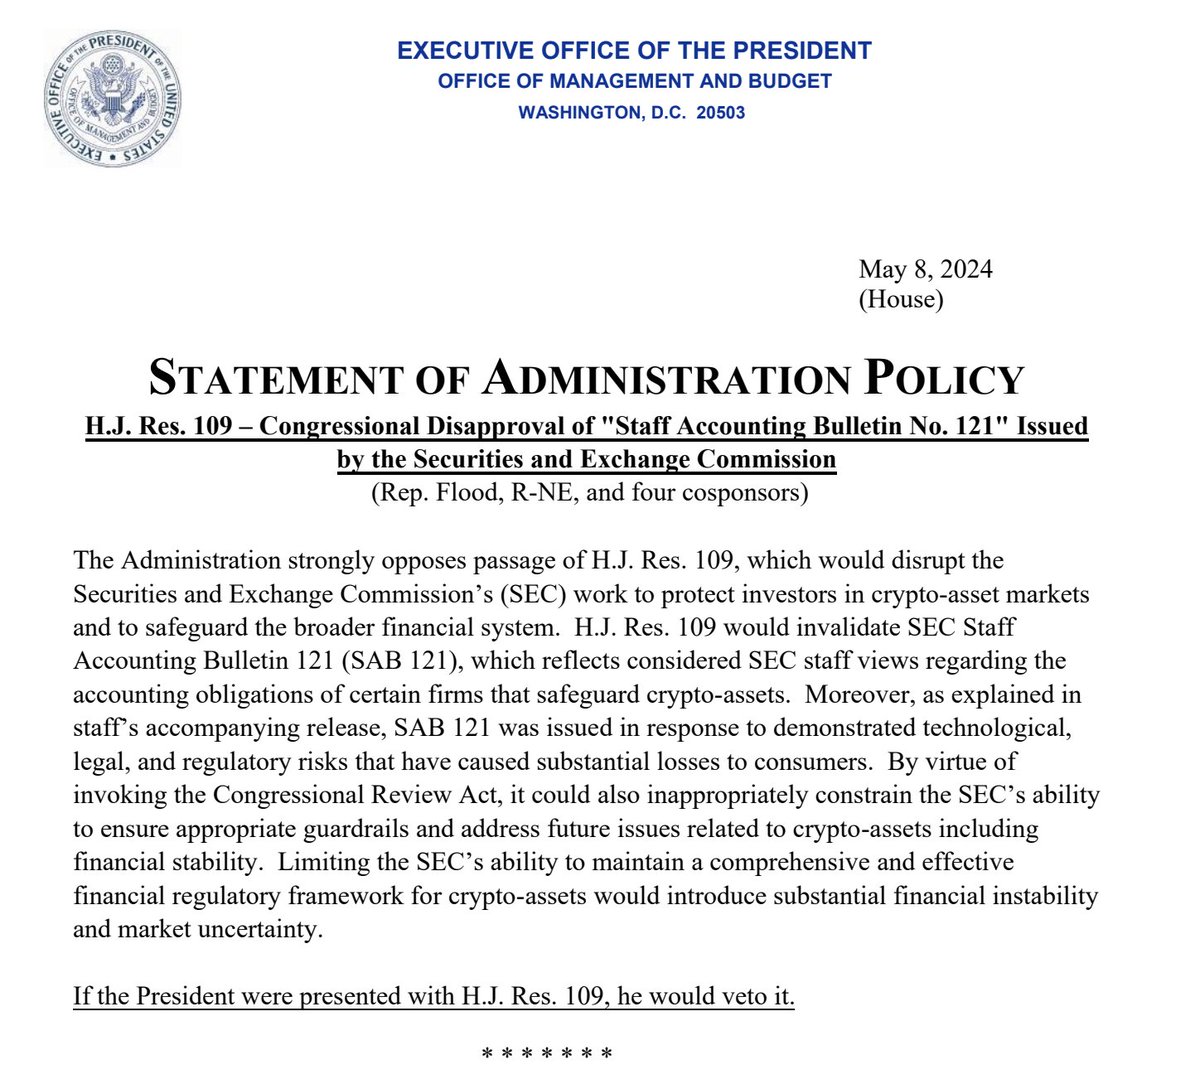 JUST IN: 🇺🇸 US President Joe Biden Administration says Biden would veto legislation that would allow highly regulated financial firms to custody #Bitcoin and crypto.